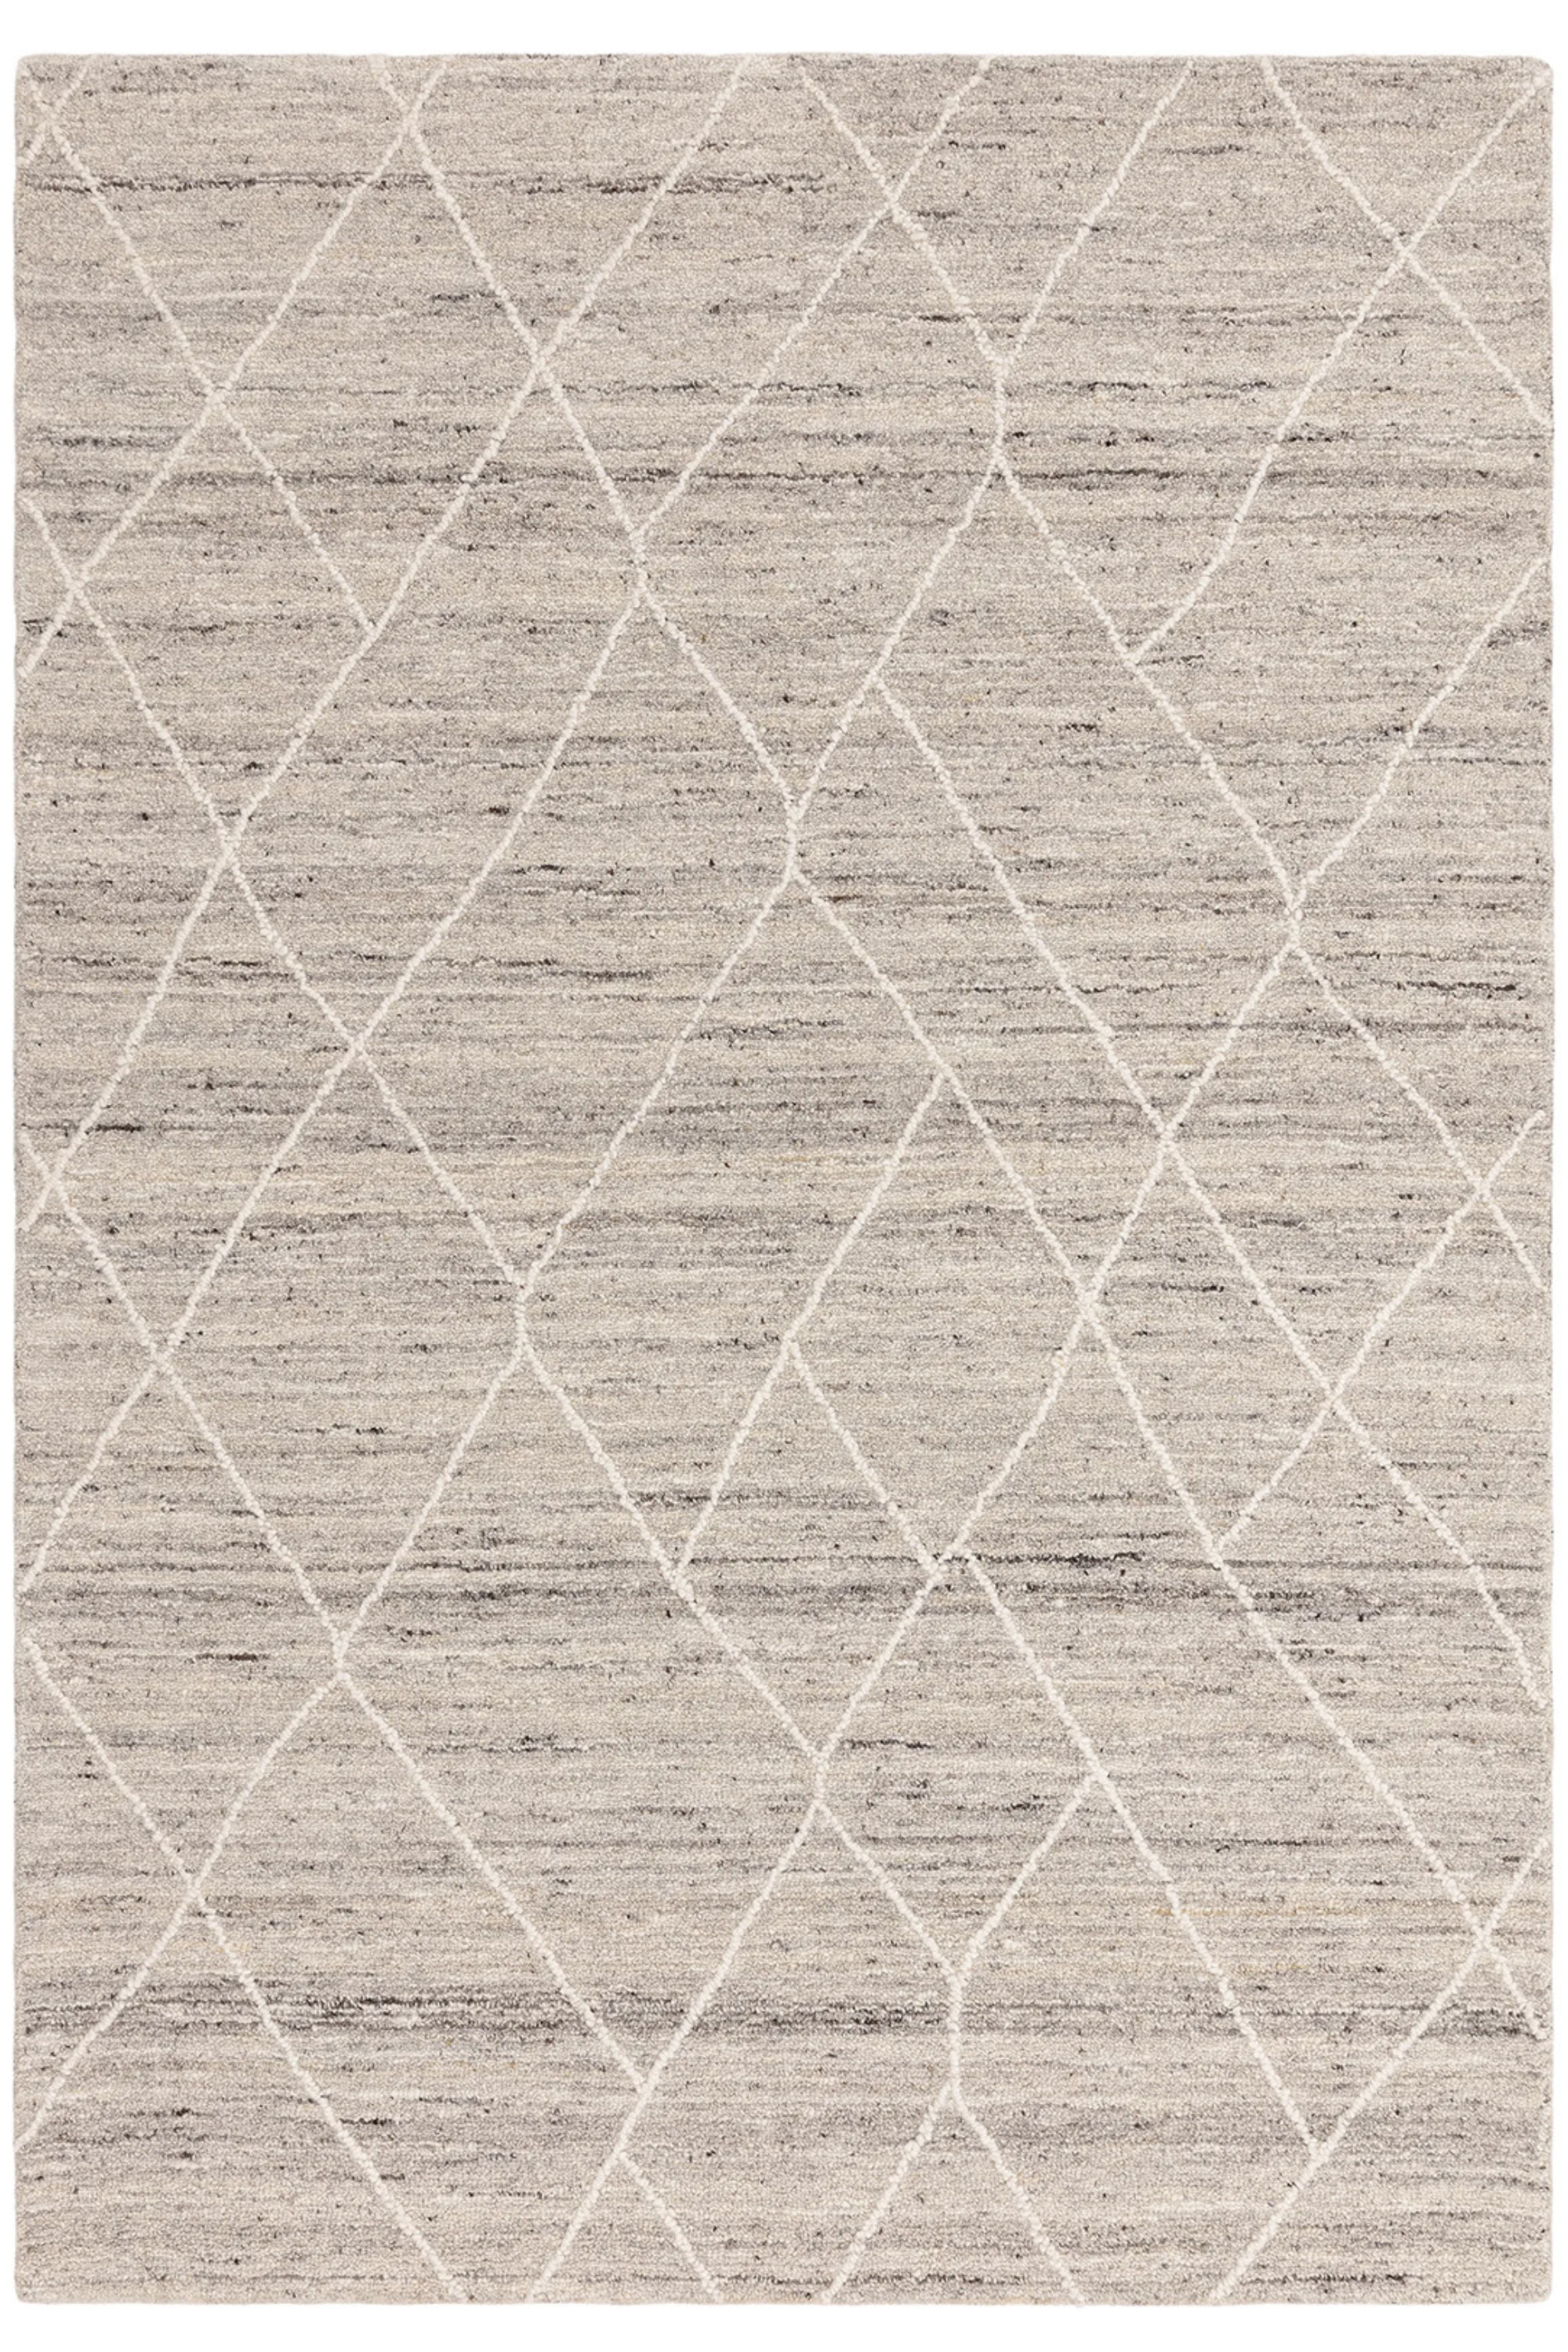 Silver wool rug with geometric pattern and heathered texture